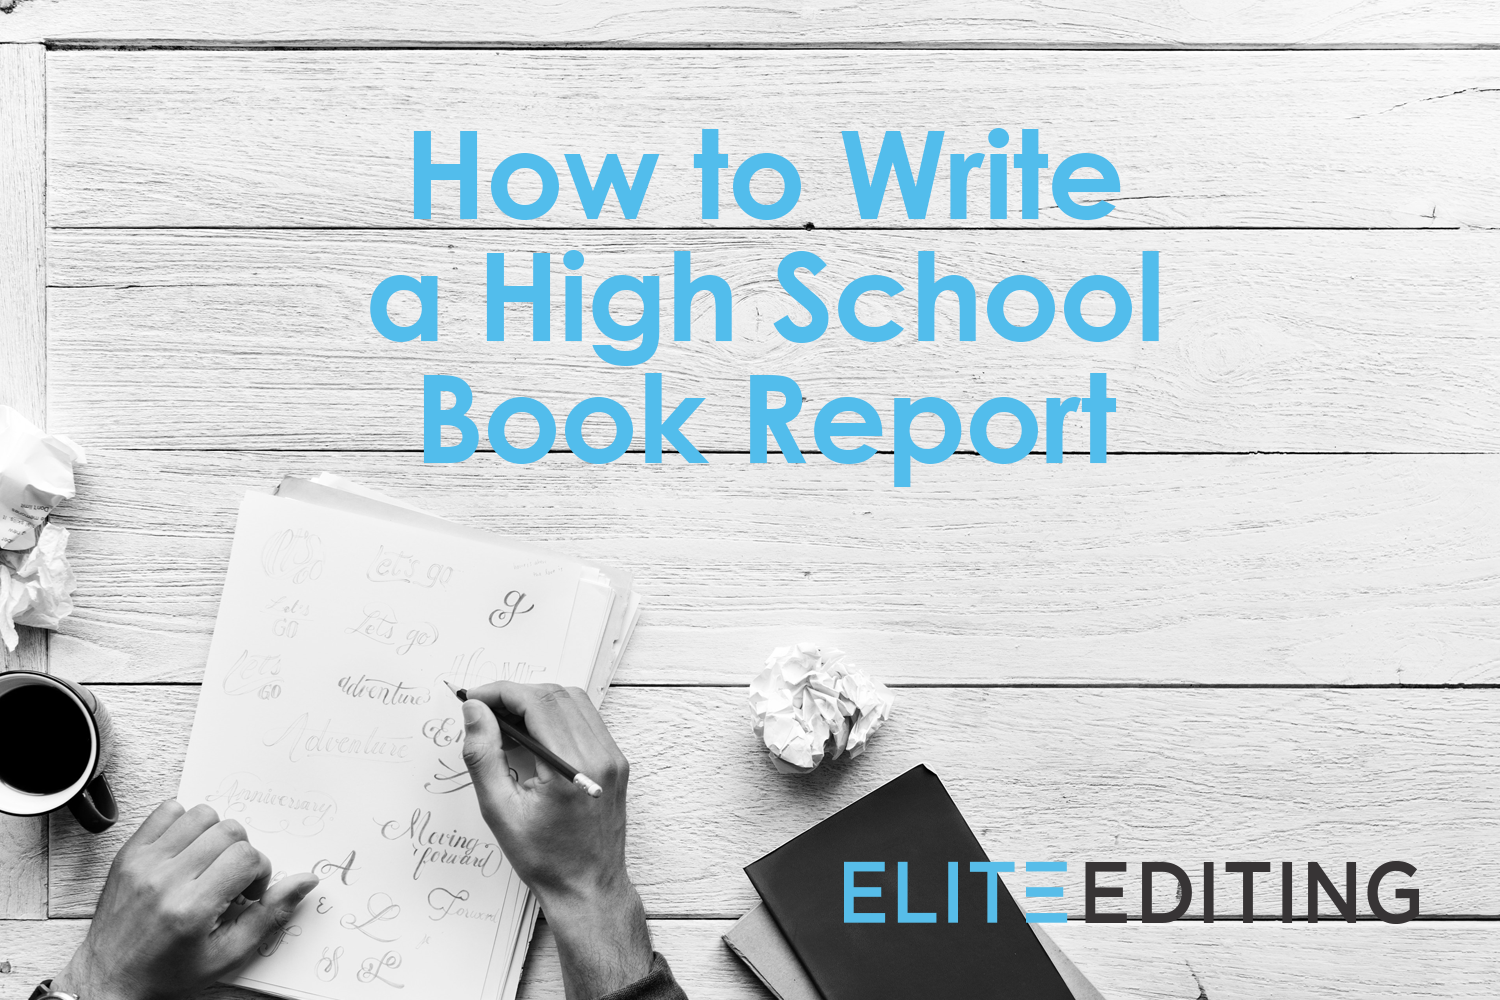 How to Write a High School Book Report - Elite Editing Intended For High School Book Report Template